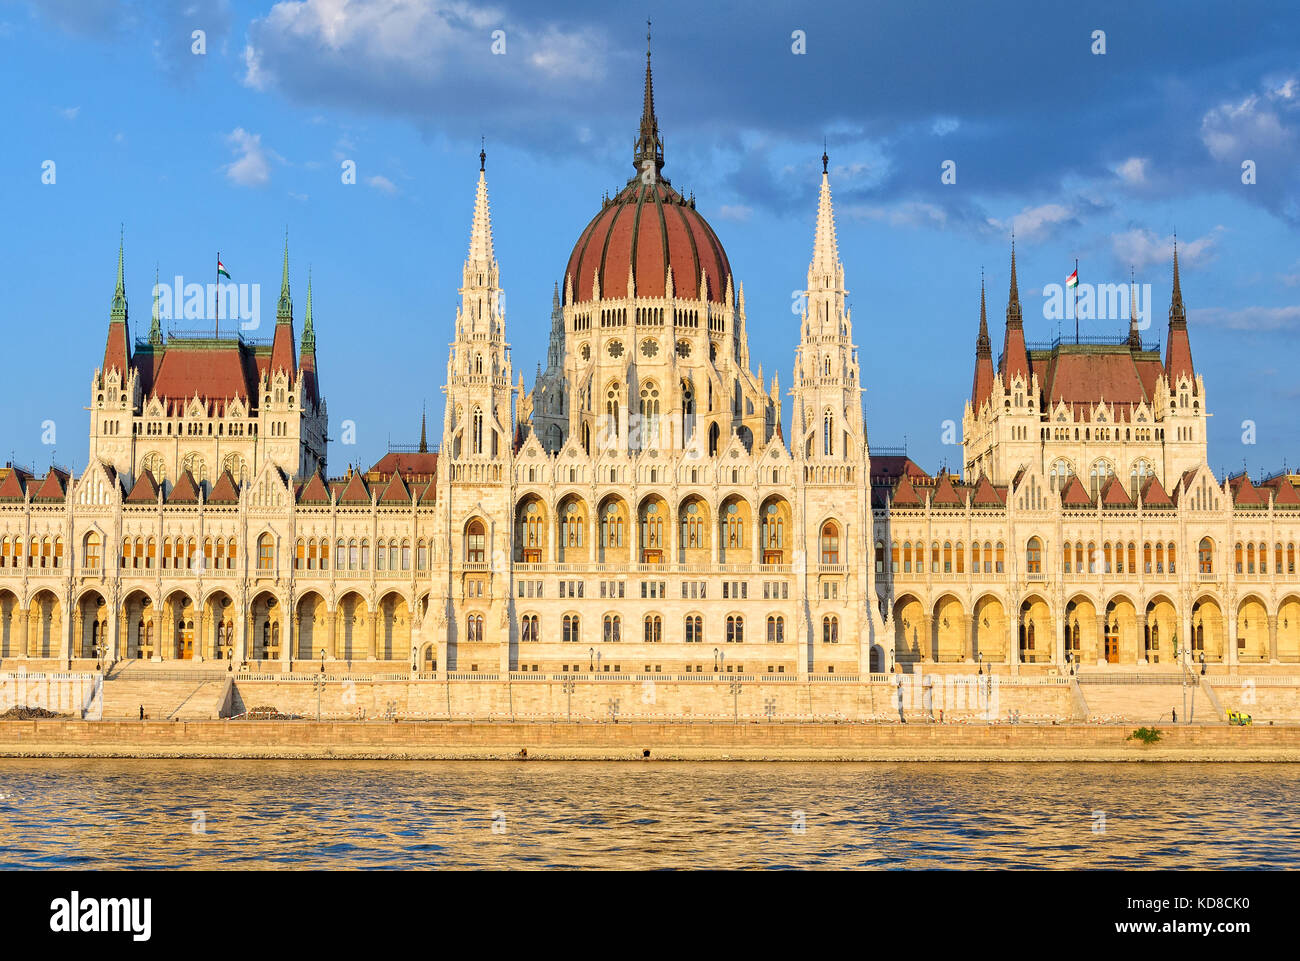 The symmetrical main facade and the central dome of the Hungarian Parliament Building overlook the River Danube - Budapest, Hungary Stock Photo